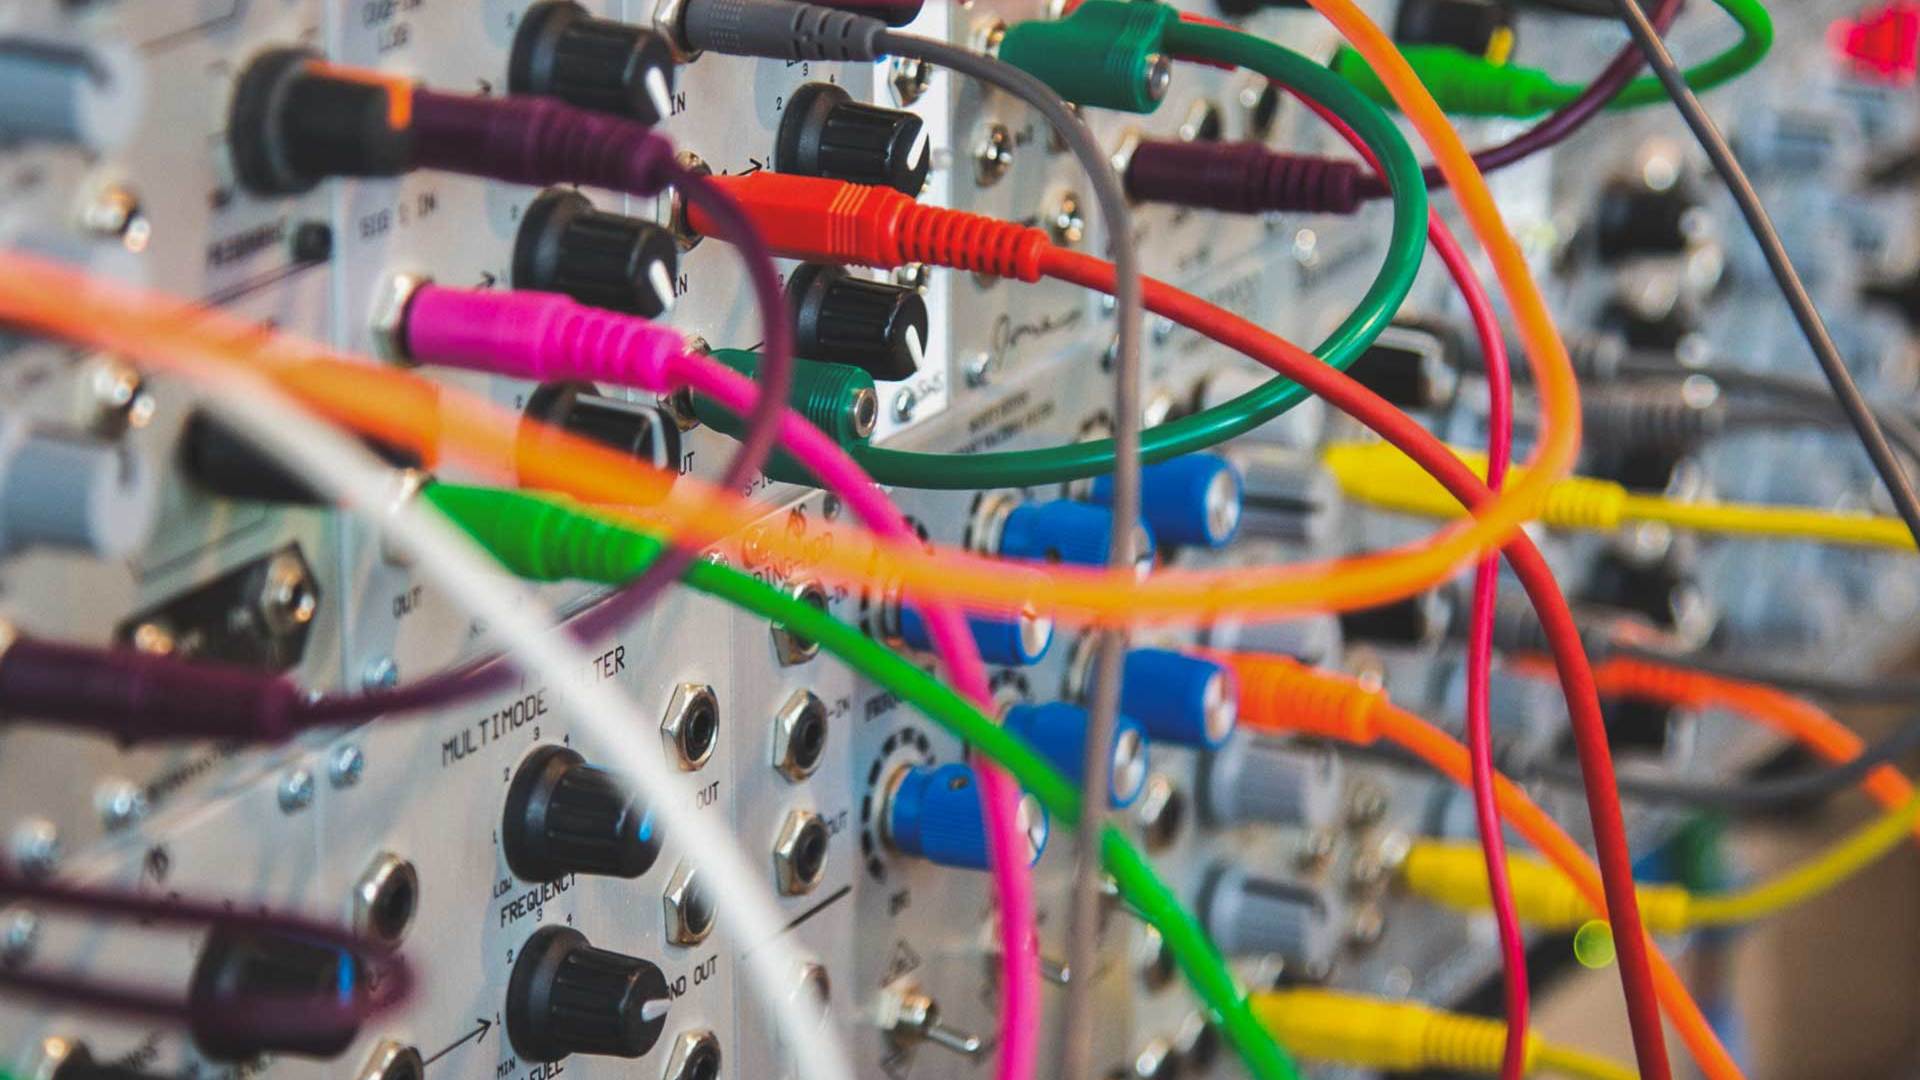 Photo by John Carlisle on Unsplash of the colorful wires used to configure an analog synth